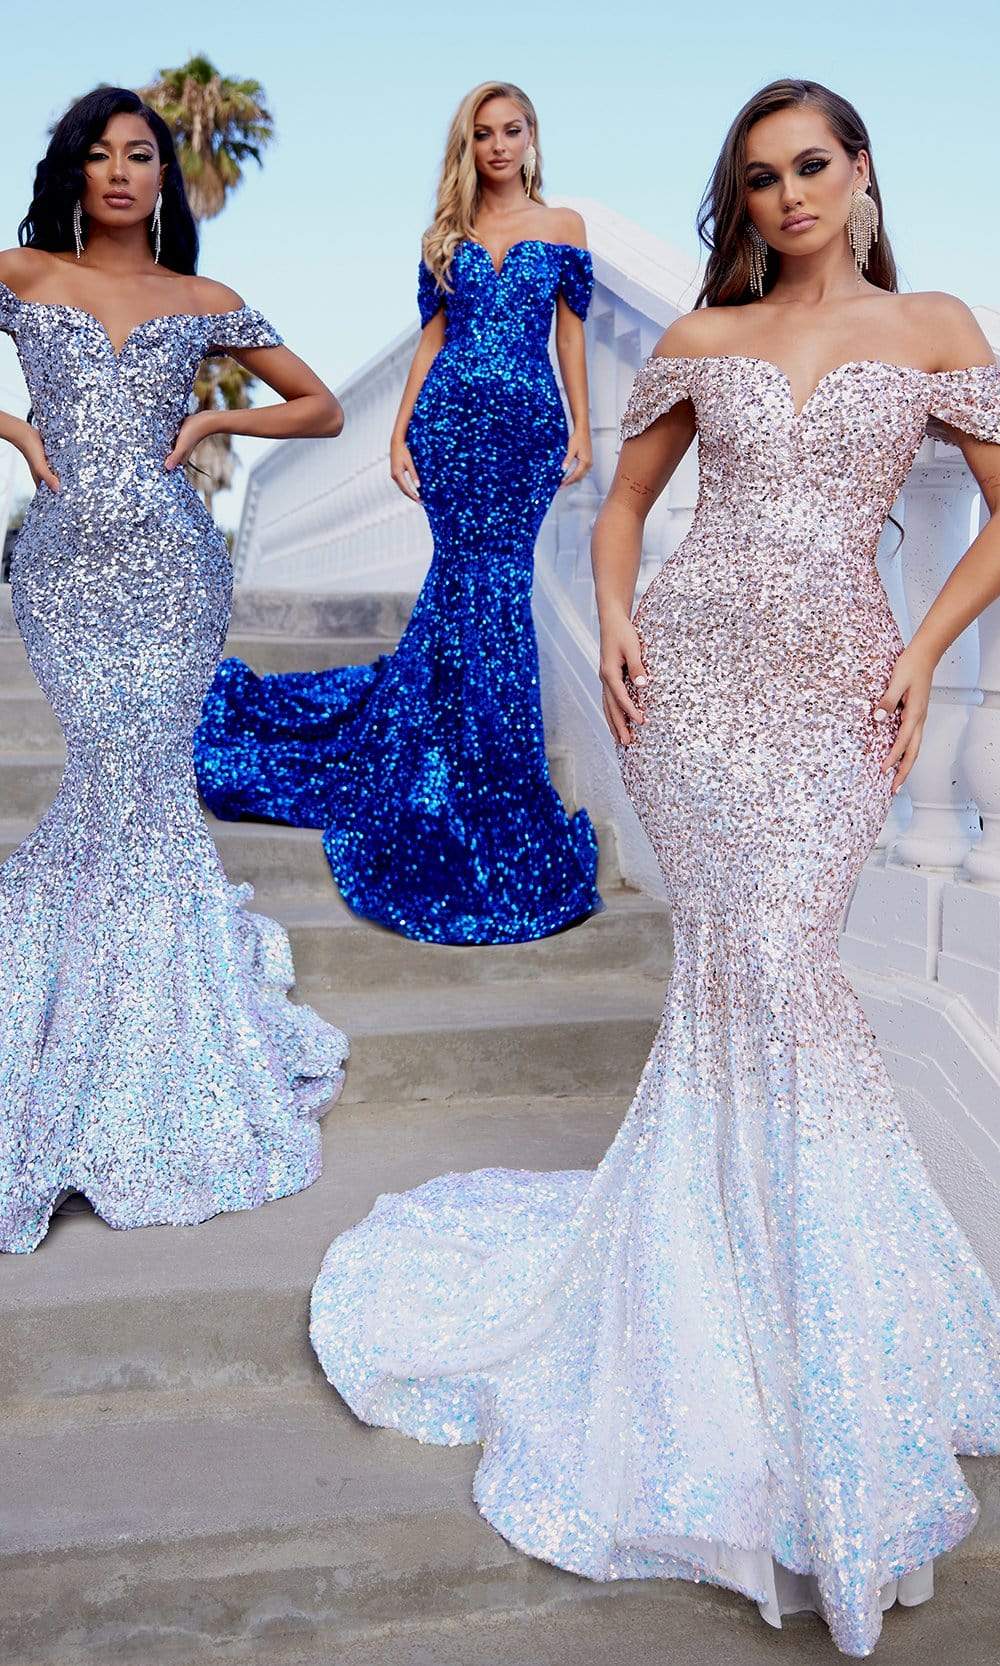 Portia and Scarlett - Ps22353 Draped Off Shoulder Sequin Gown
